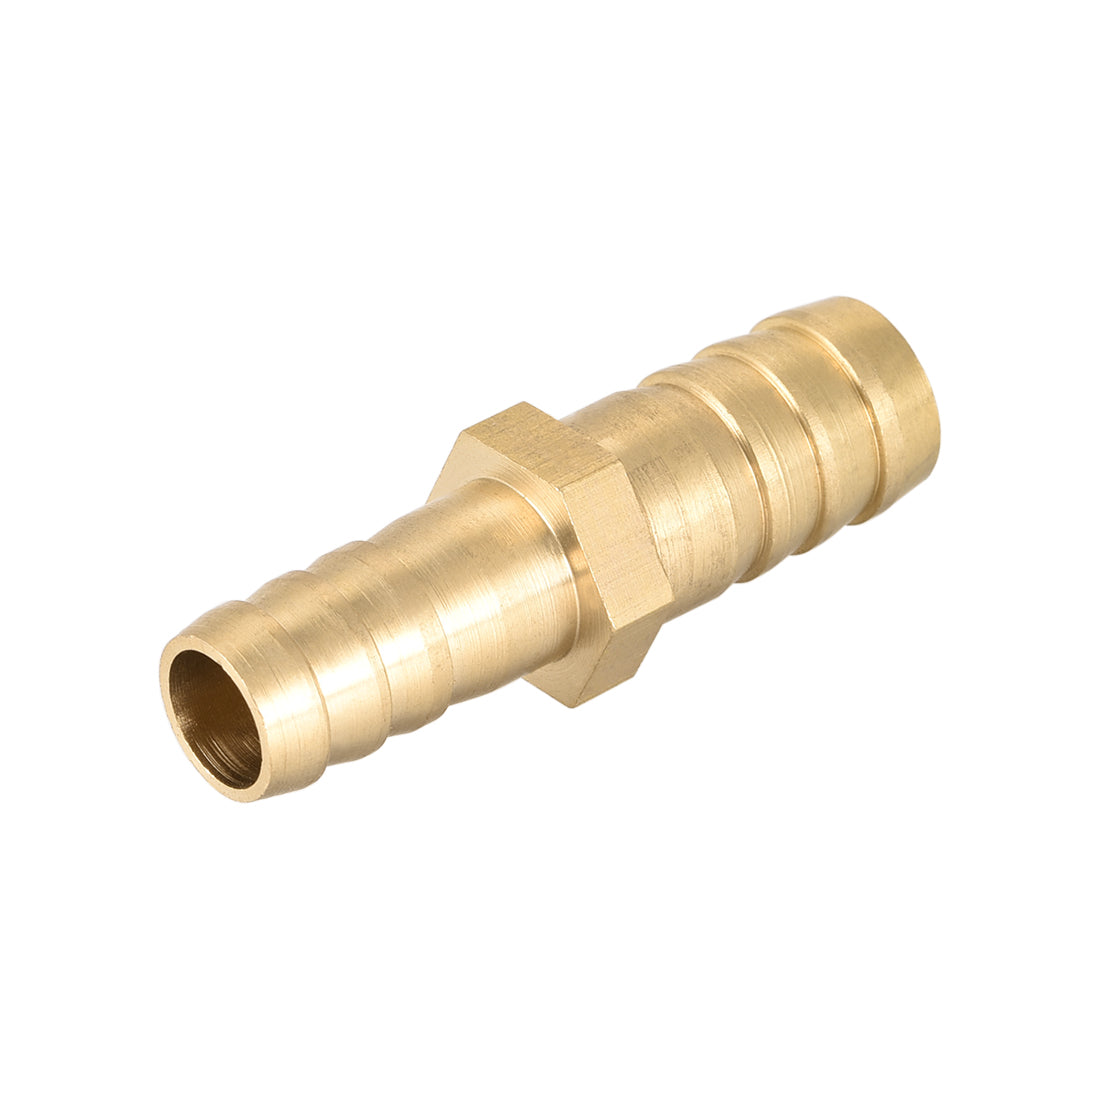 Uxcell Uxcell Straight Brass Barb Fitting Reducer, Fit Hose ID 12mm to 6mm 3pcs